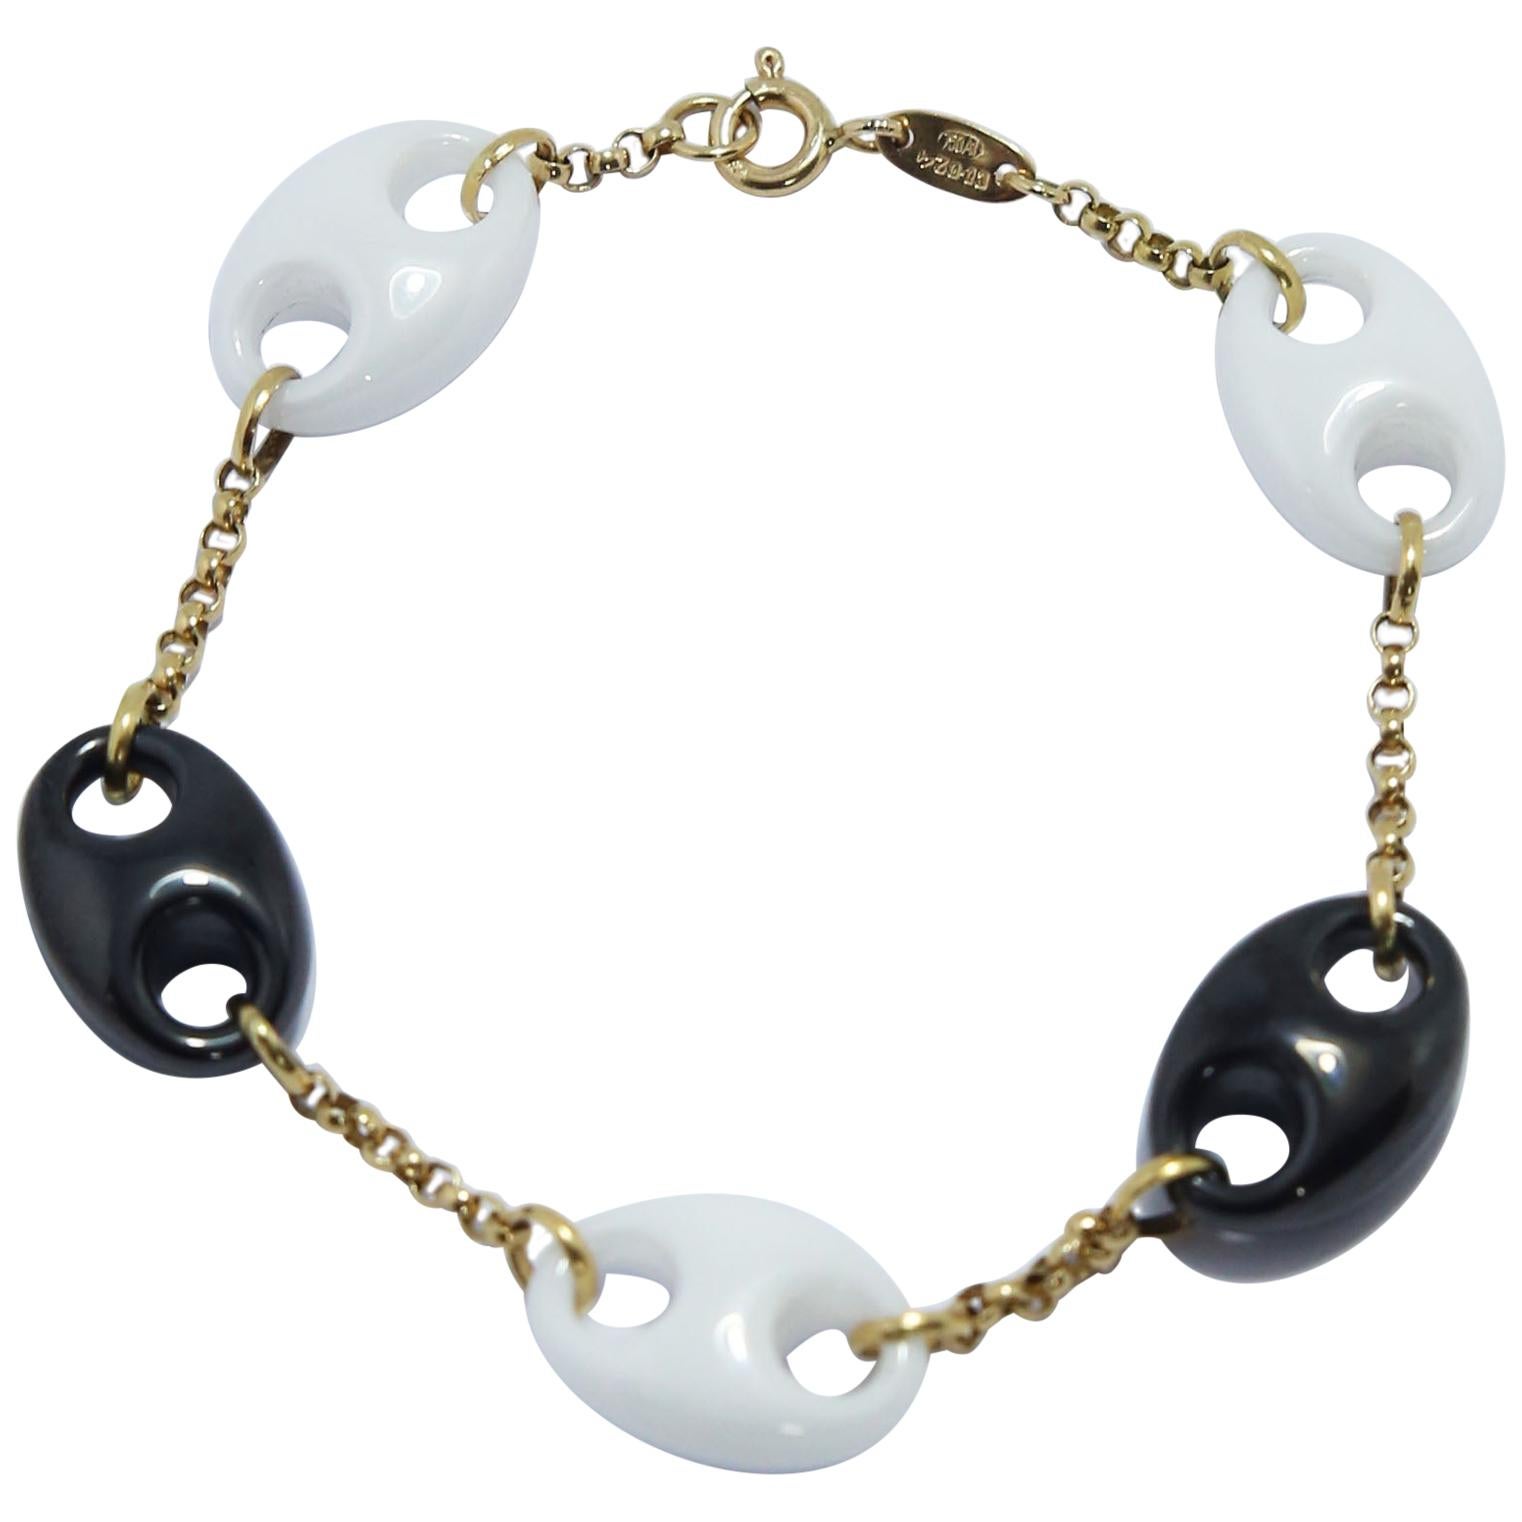 Nautical Anchor Link Bracelet 18k Yellow Gold Chain, Black and White Porcelain